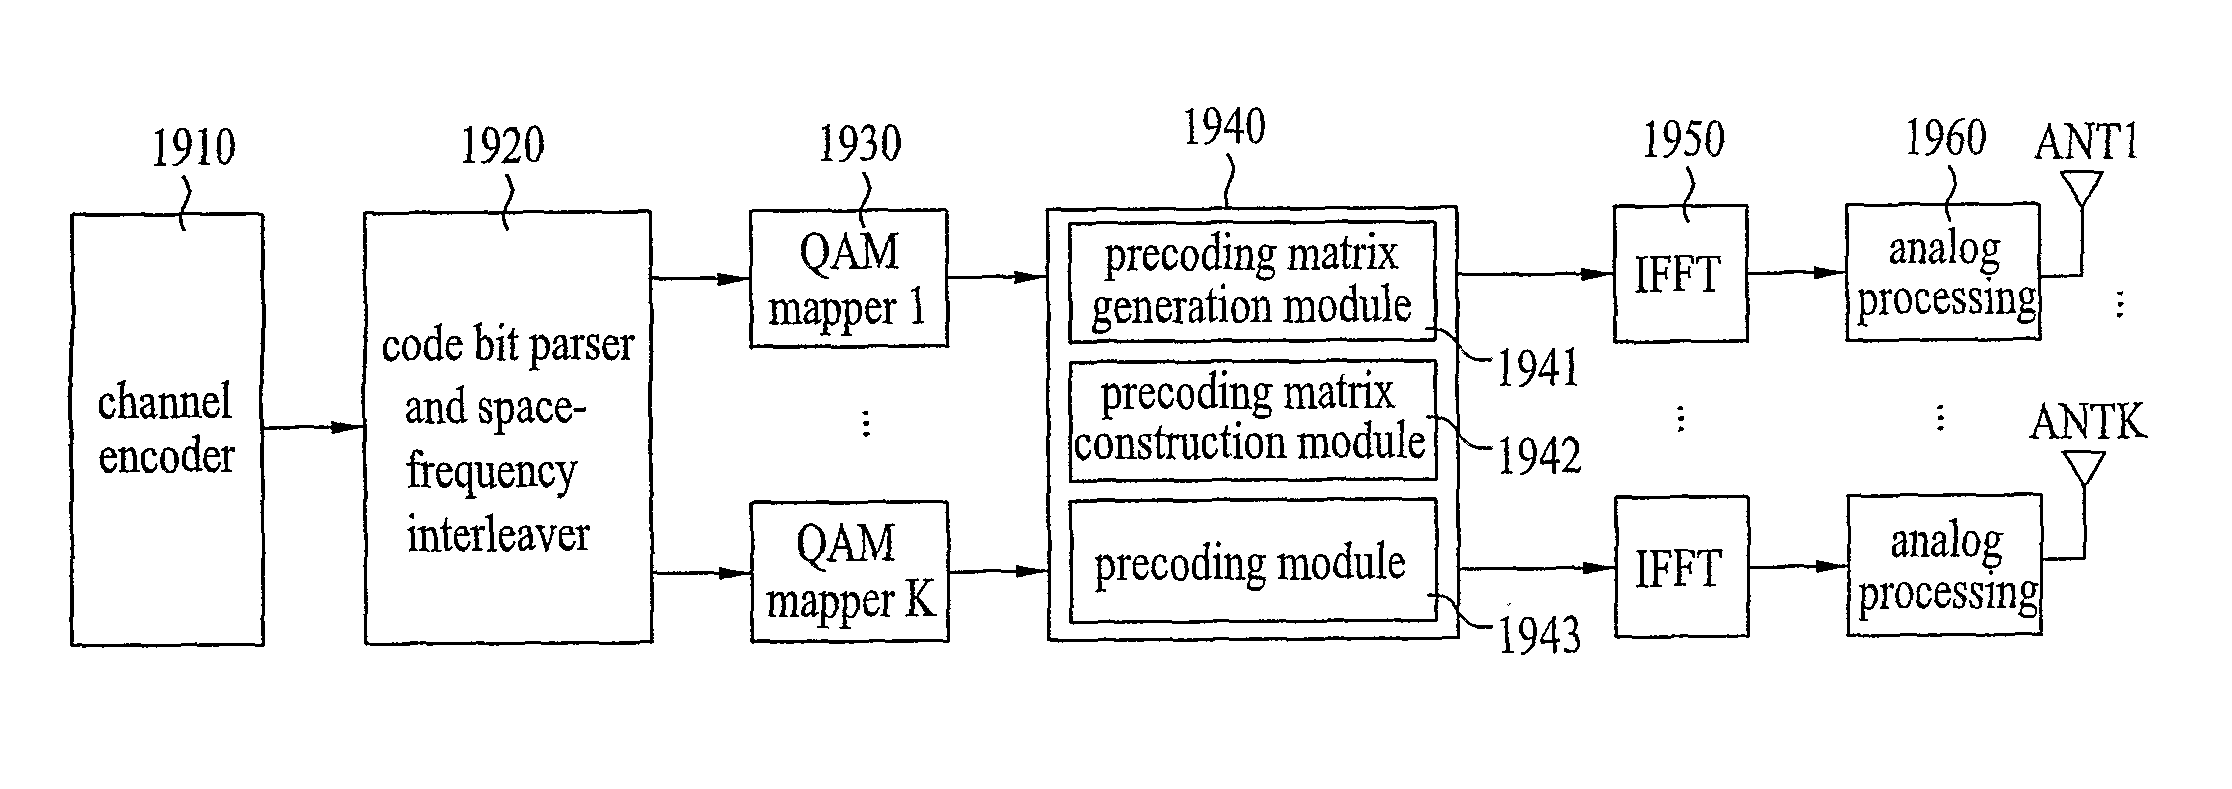 Method and apparatus for correcting errors in a multiple subcarriers communication system using multiple antennas